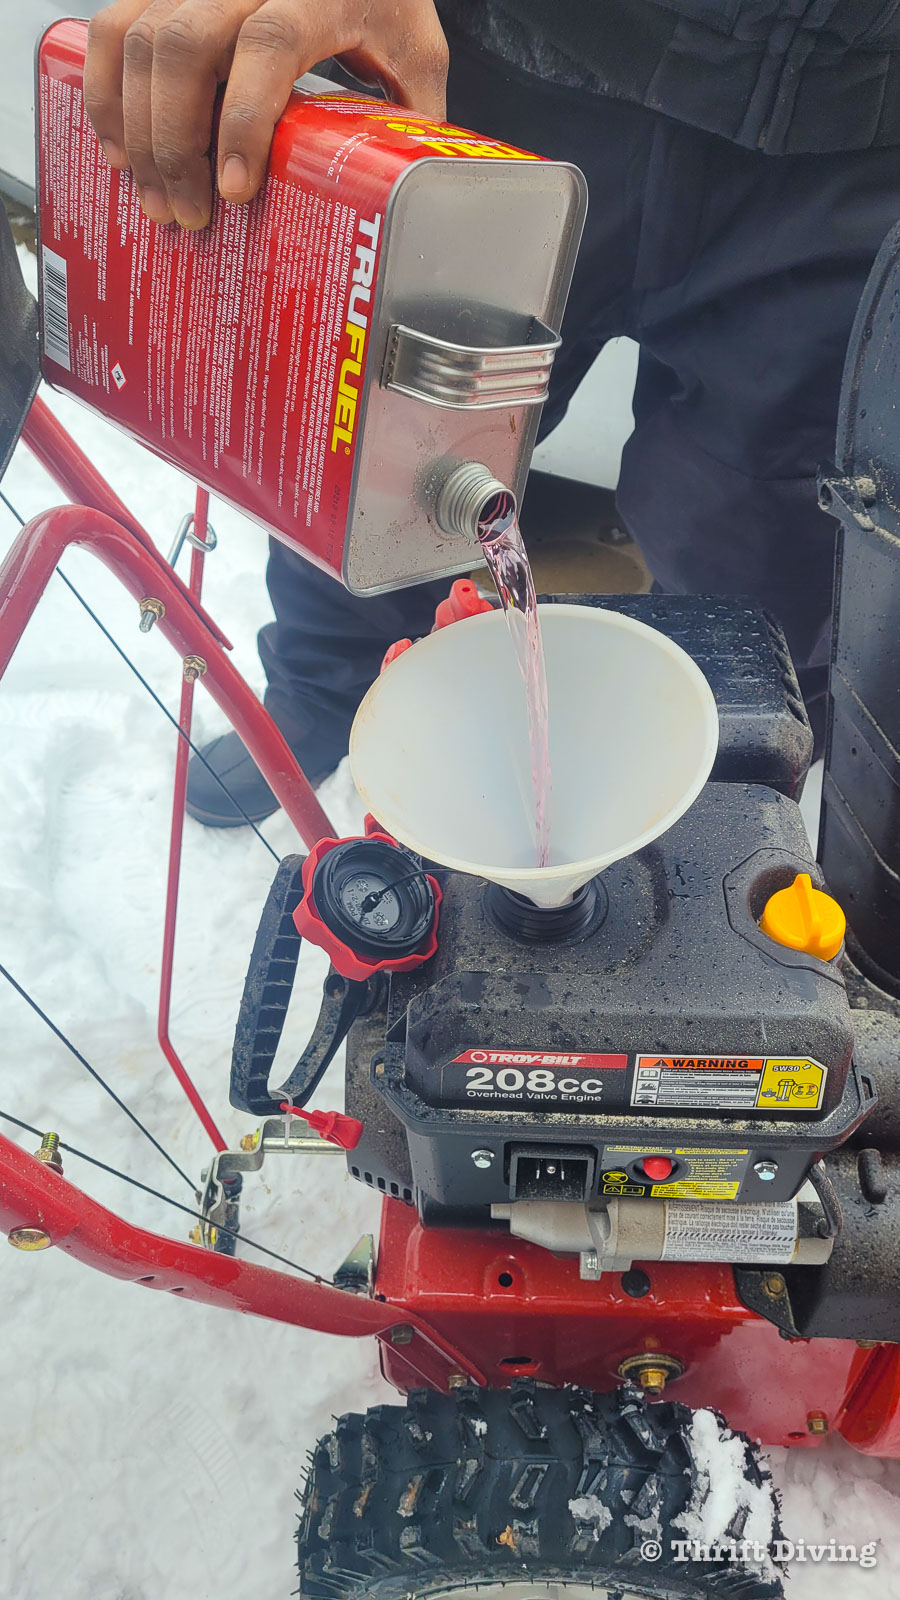 5 Questions You Must As Before Buying and Using a Snowblower - Use a funnel to prevent spills - Thrift Diving